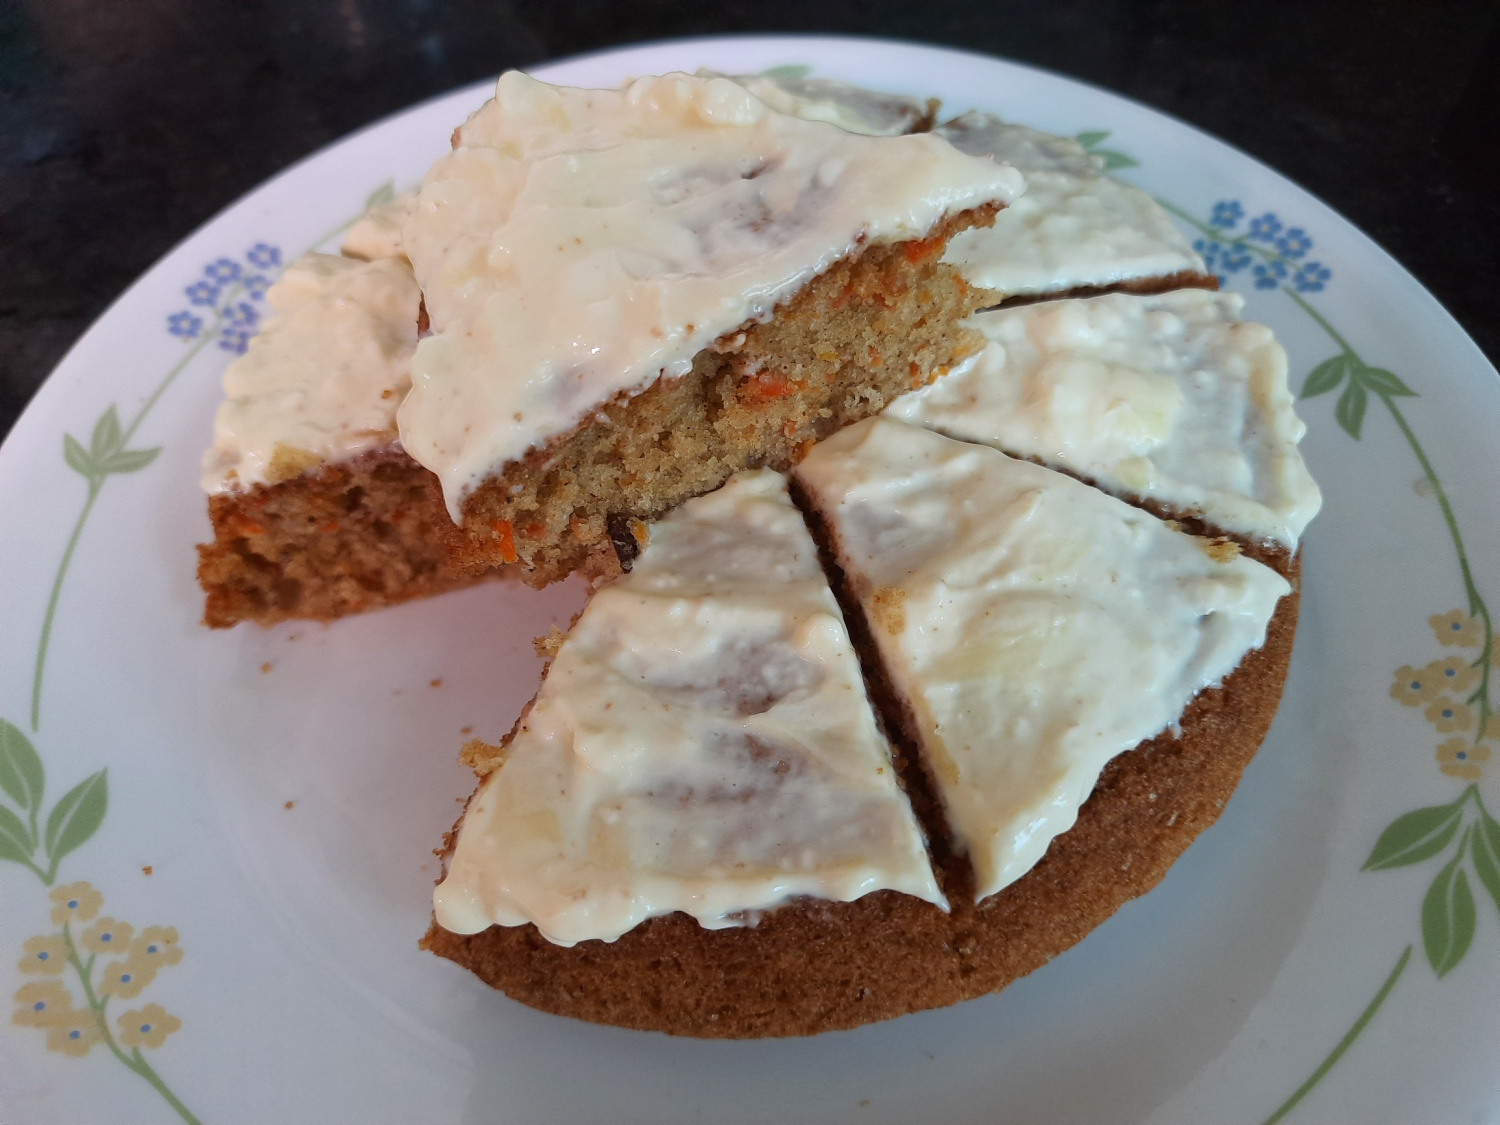 Easy recipe for Carrot Cake! Made in a rice cooker with pancake mix. The  sweetness and smooth texture of carrots is addictive! [entabe.com]